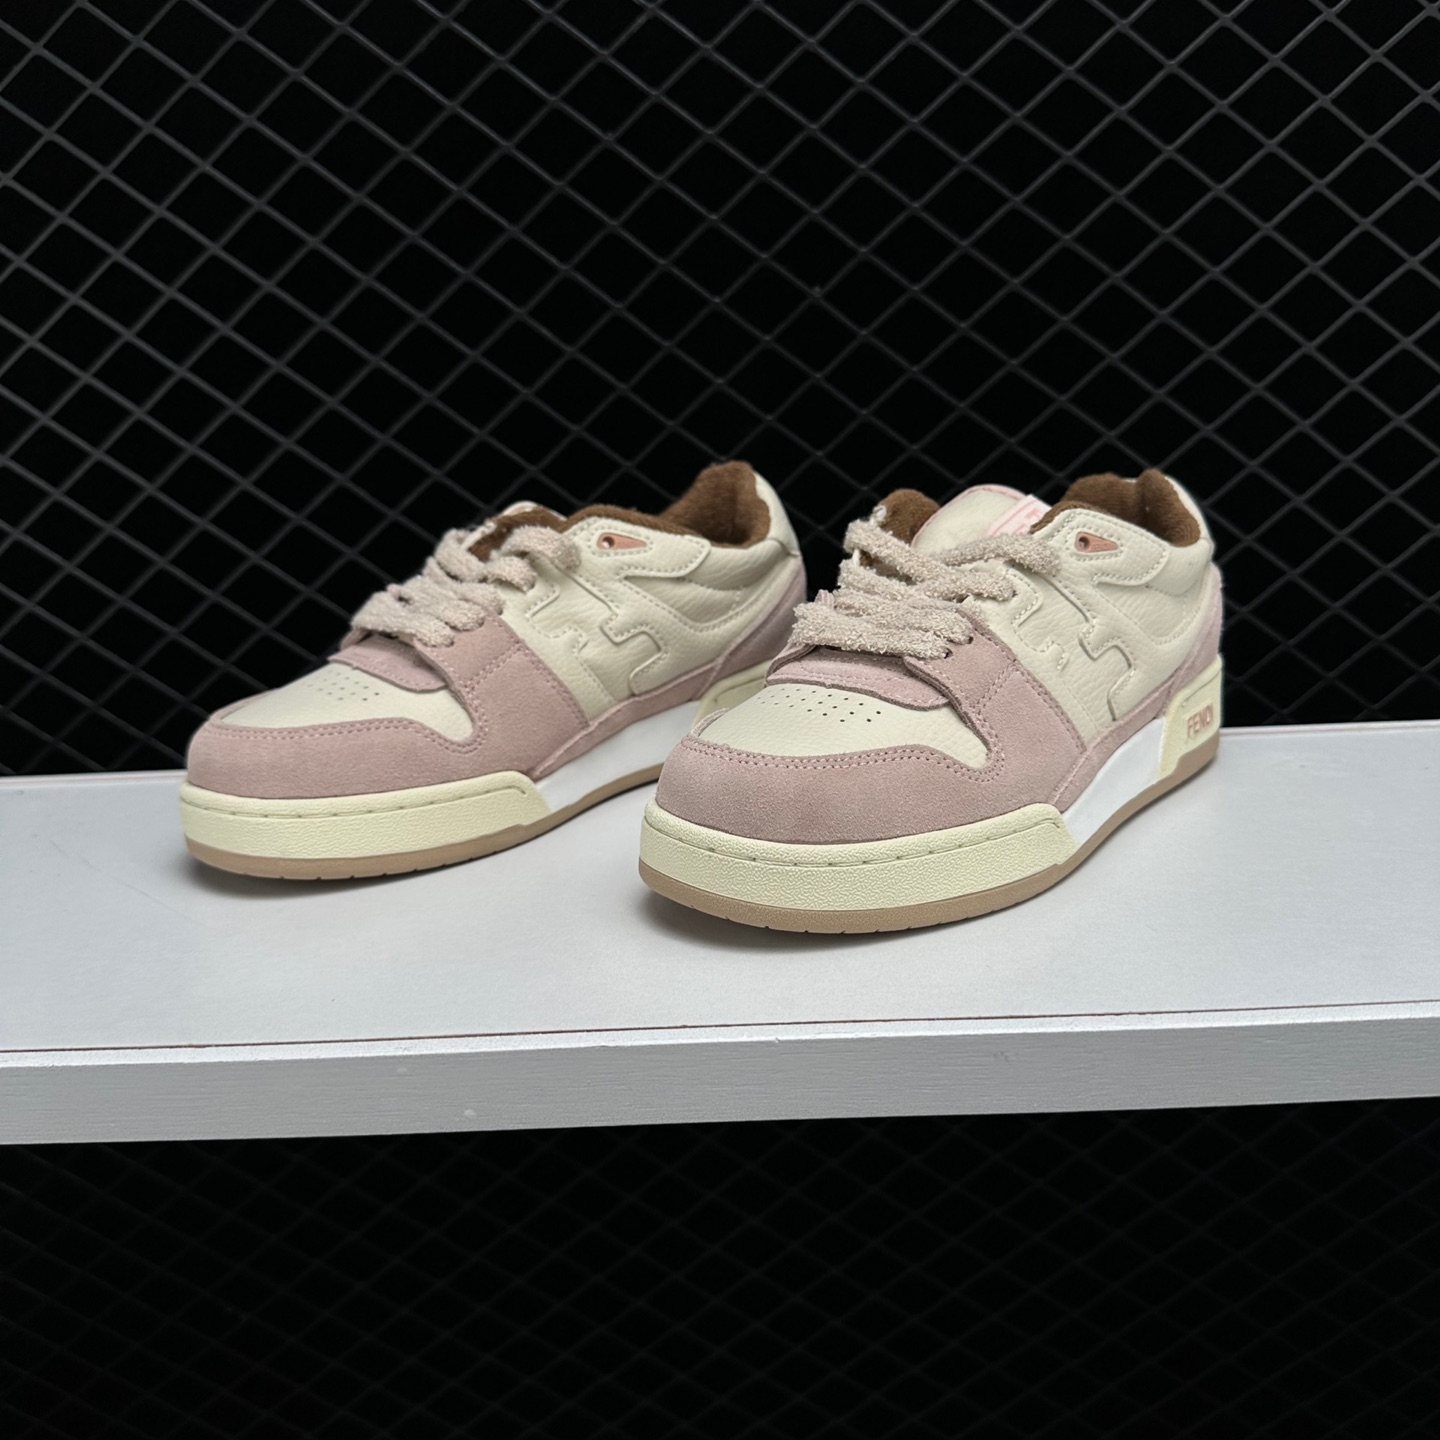 Fendi Pink Suede Low Tops | Shop the 8E8252AHH2-F1FHT Now!